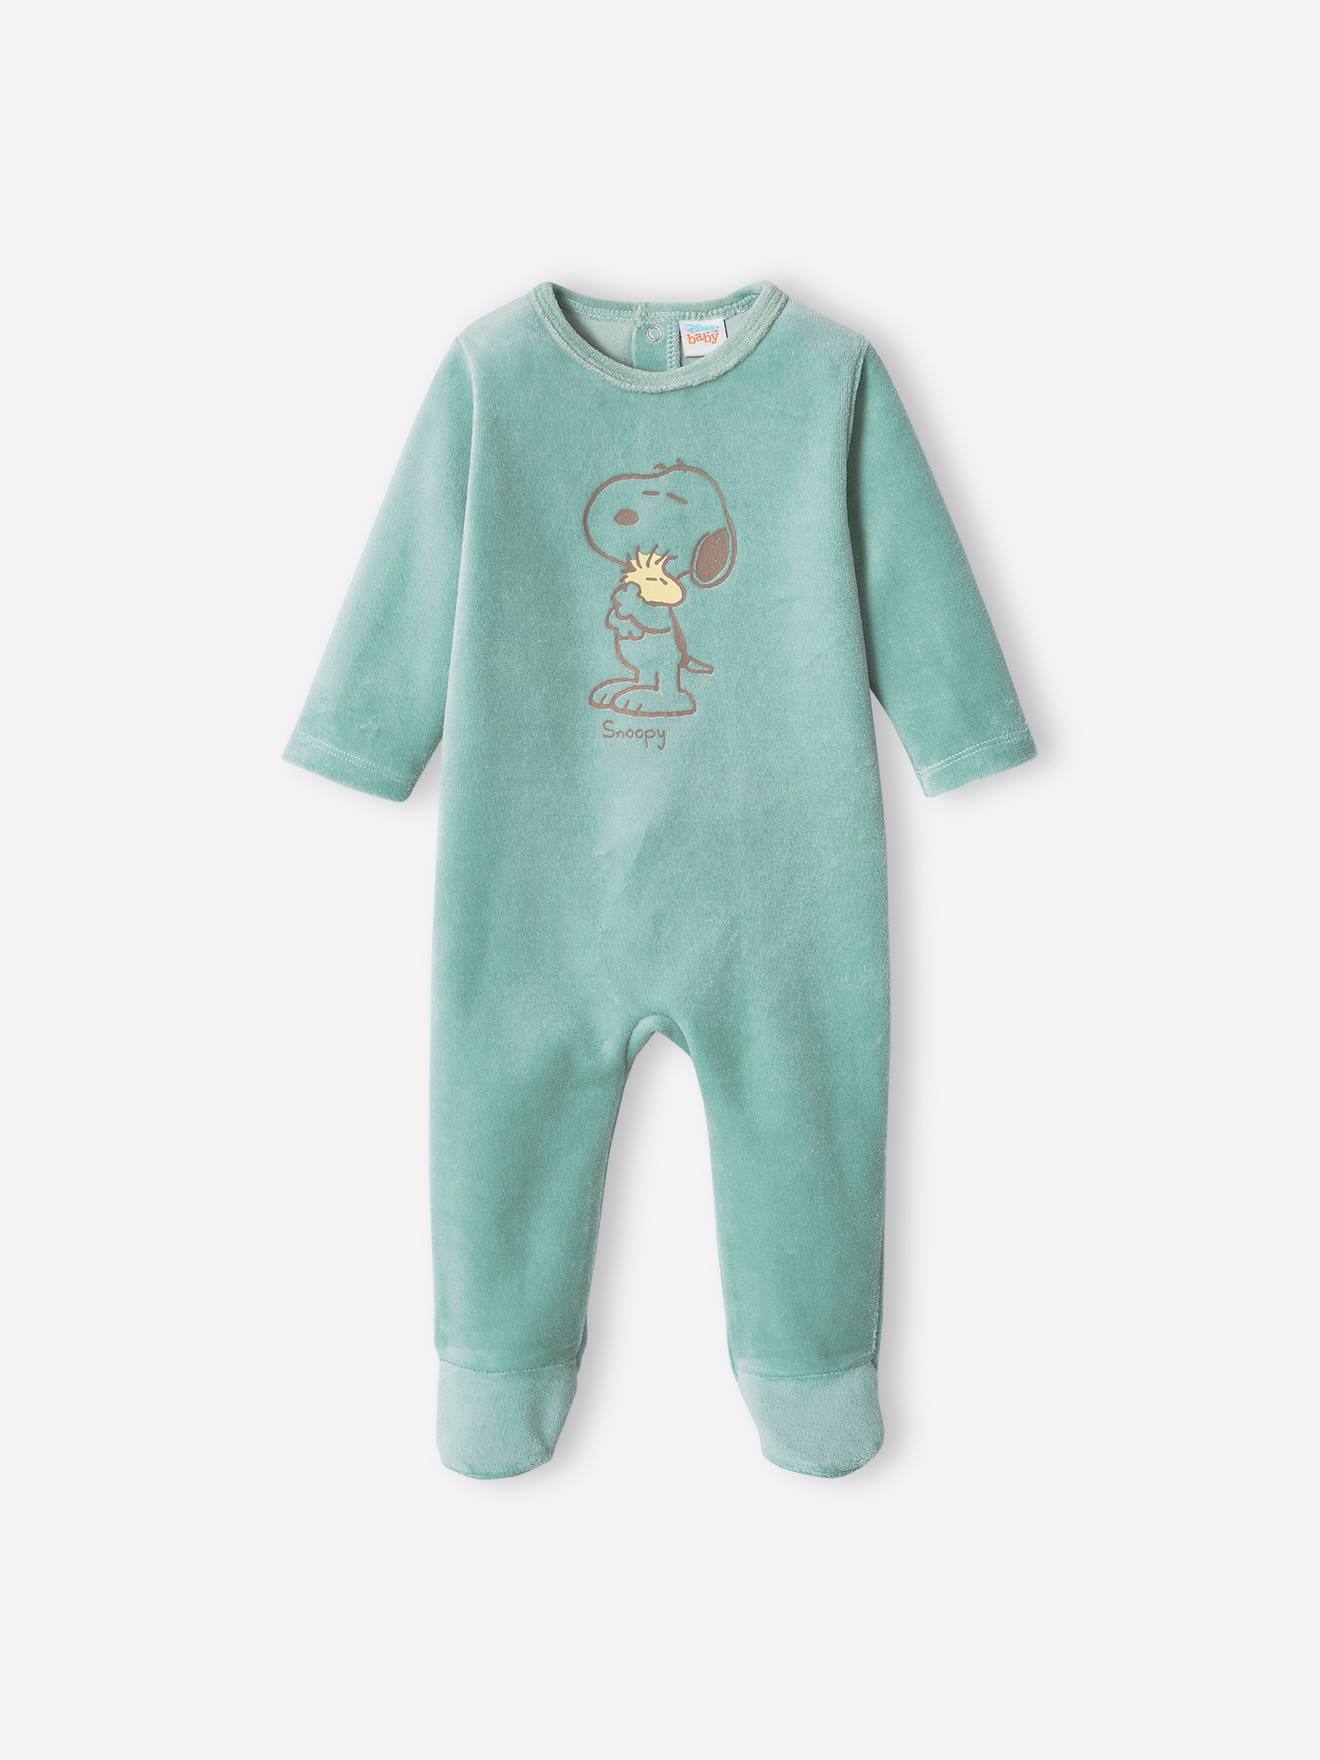 Snoopy Sleepsuit for Babies, by Peanuts(r) sage green